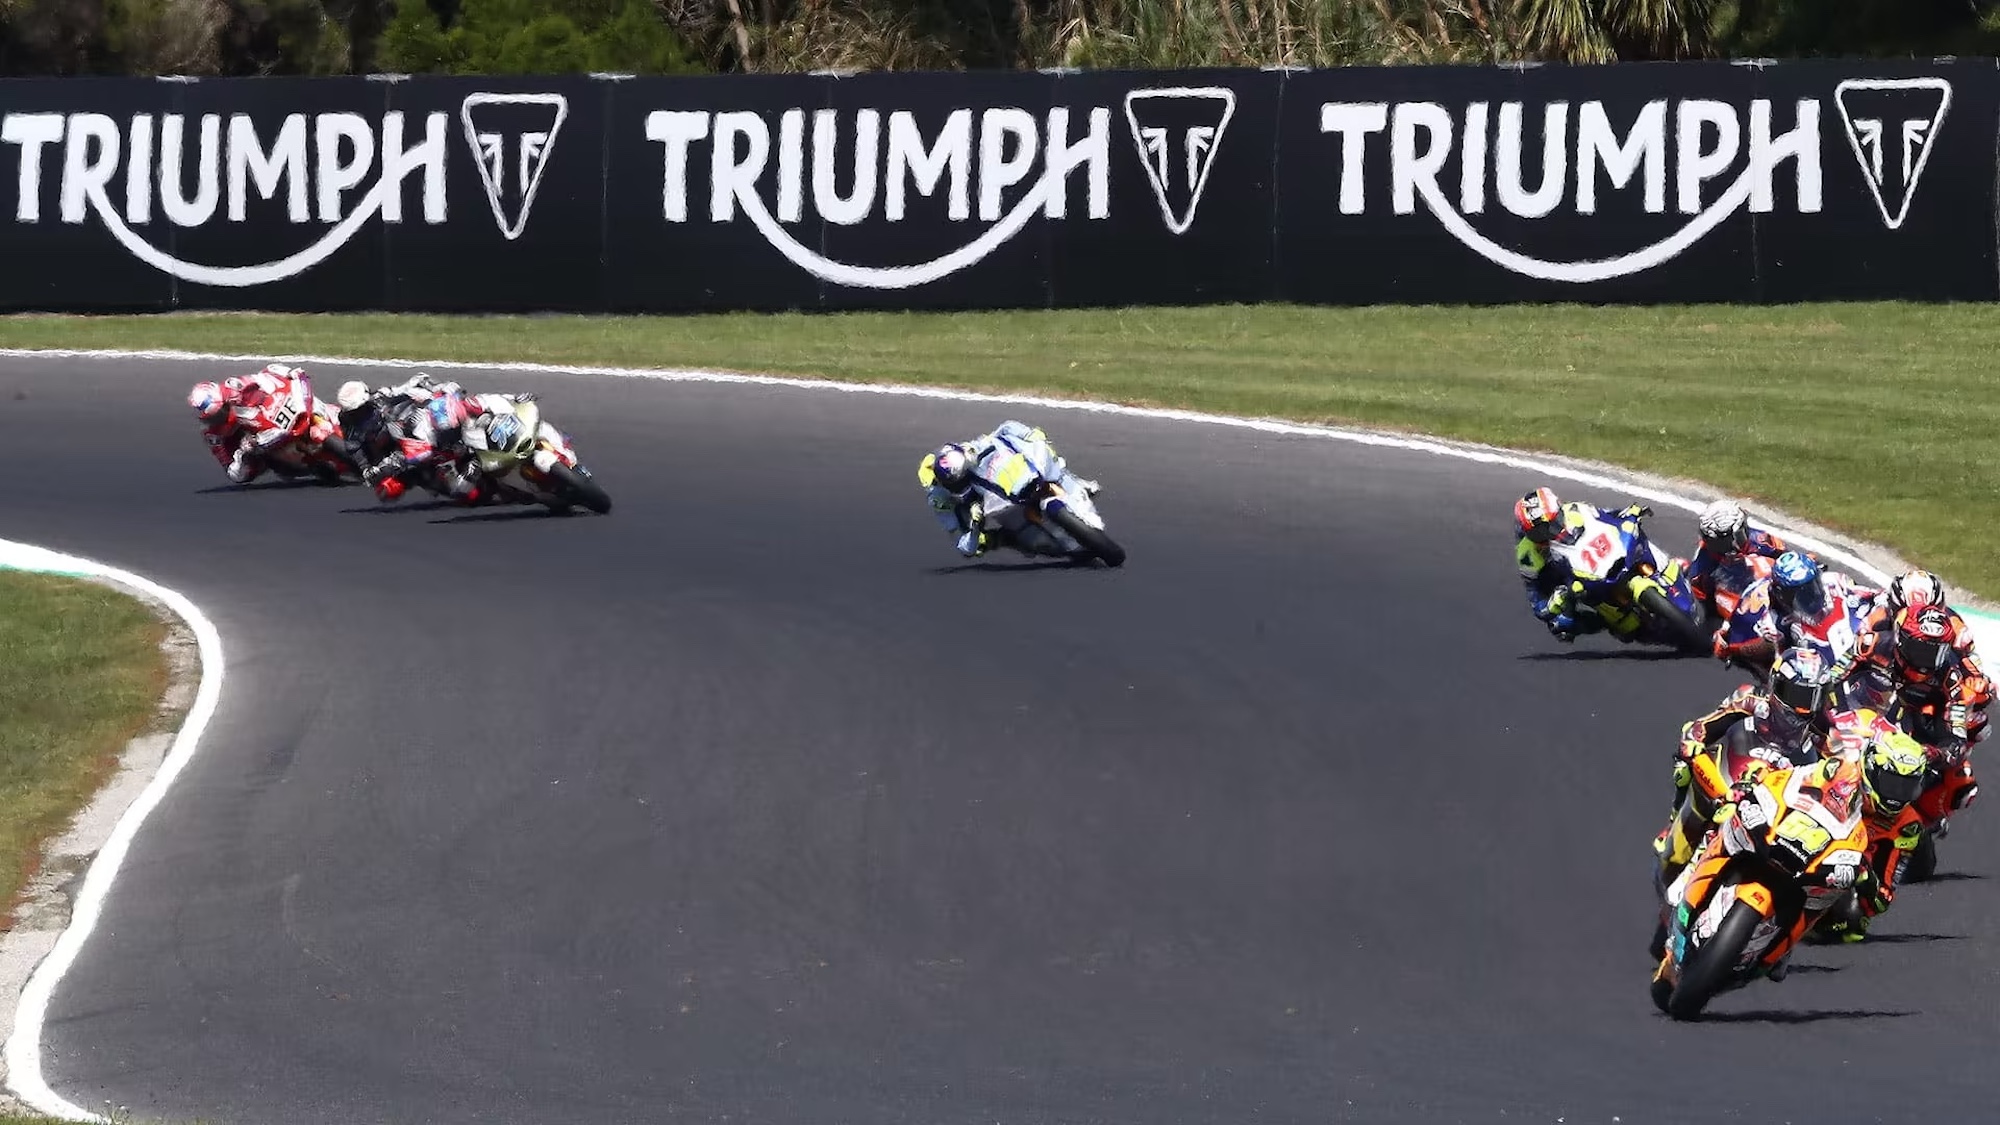 A view of the Moto2 circuit.